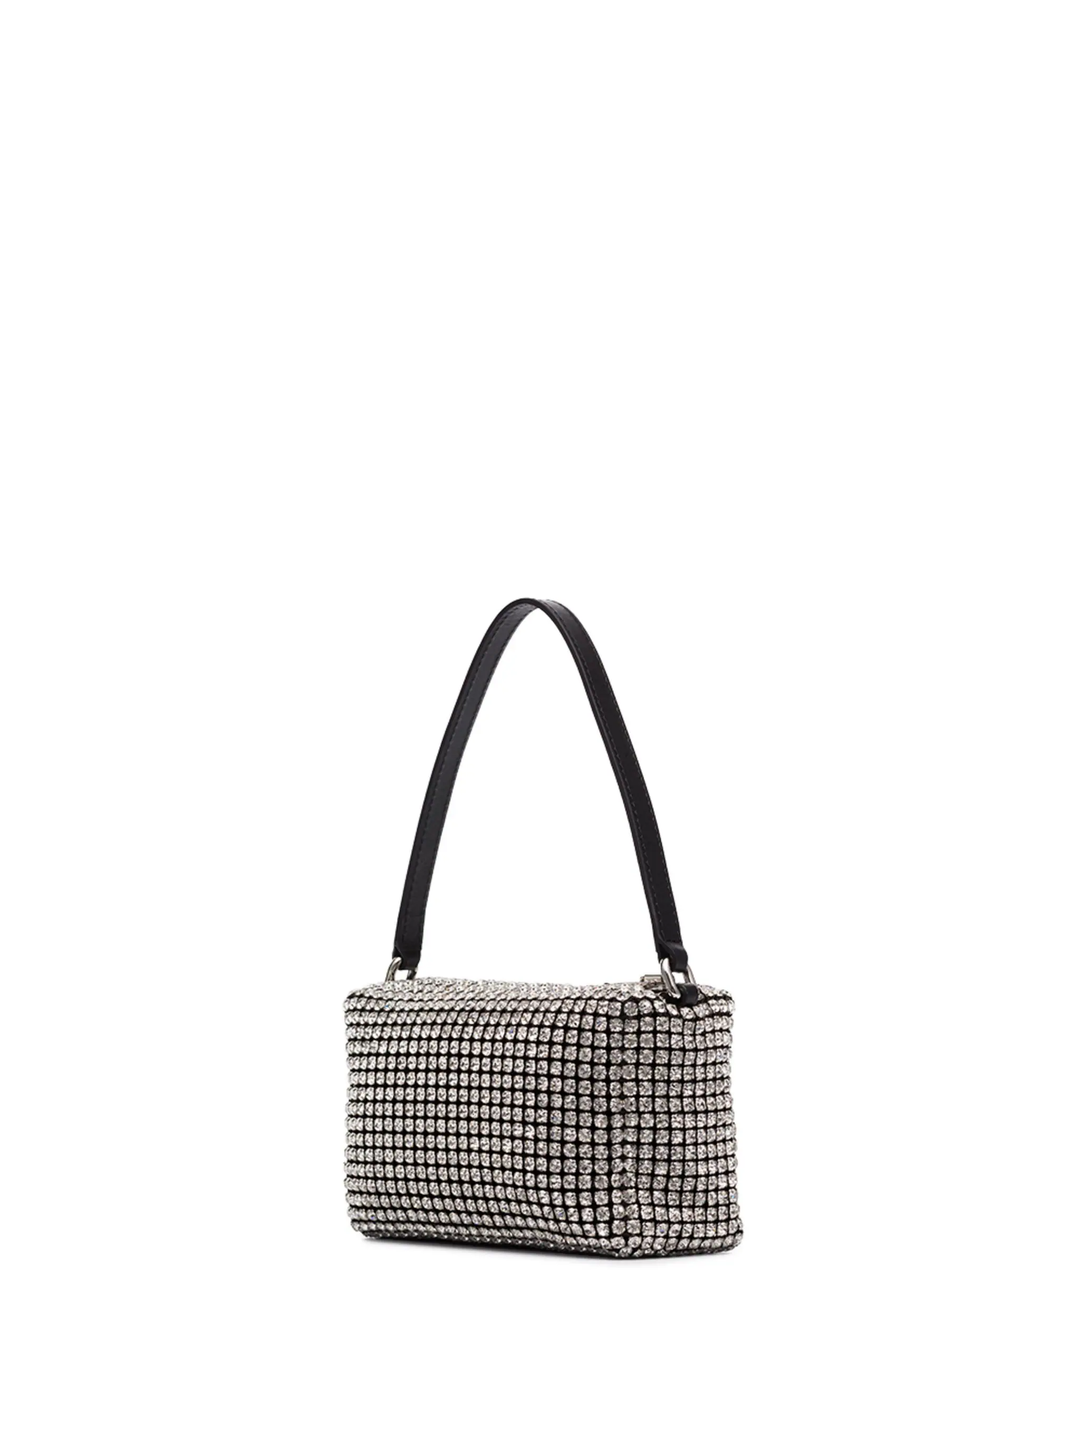 Heiress Pouch In Crystal Mesh